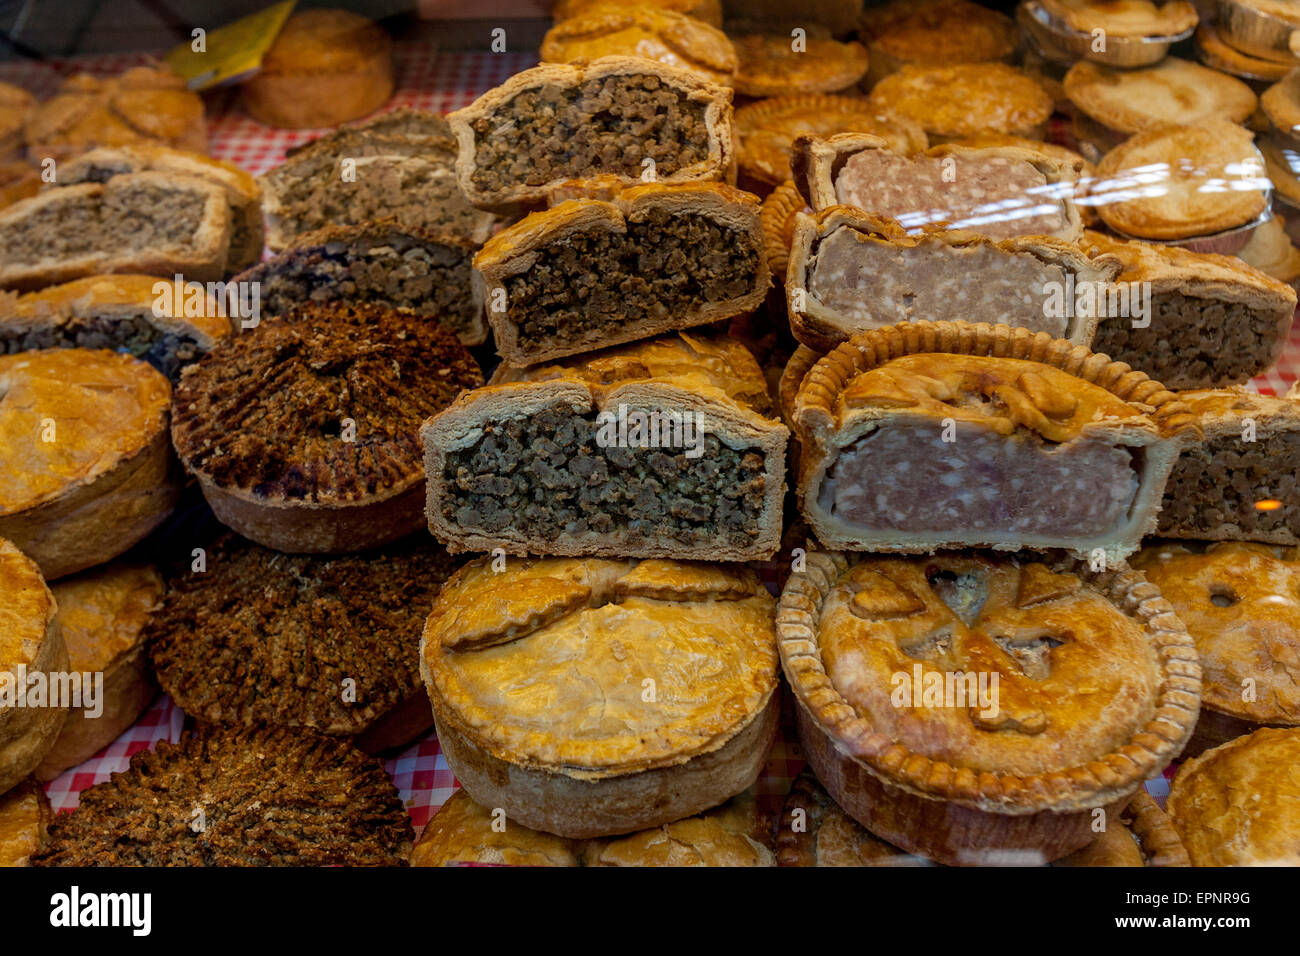 Traditionally Made Pies For Sale In Borough Market, London Bridge Area, London, England Stock Photo